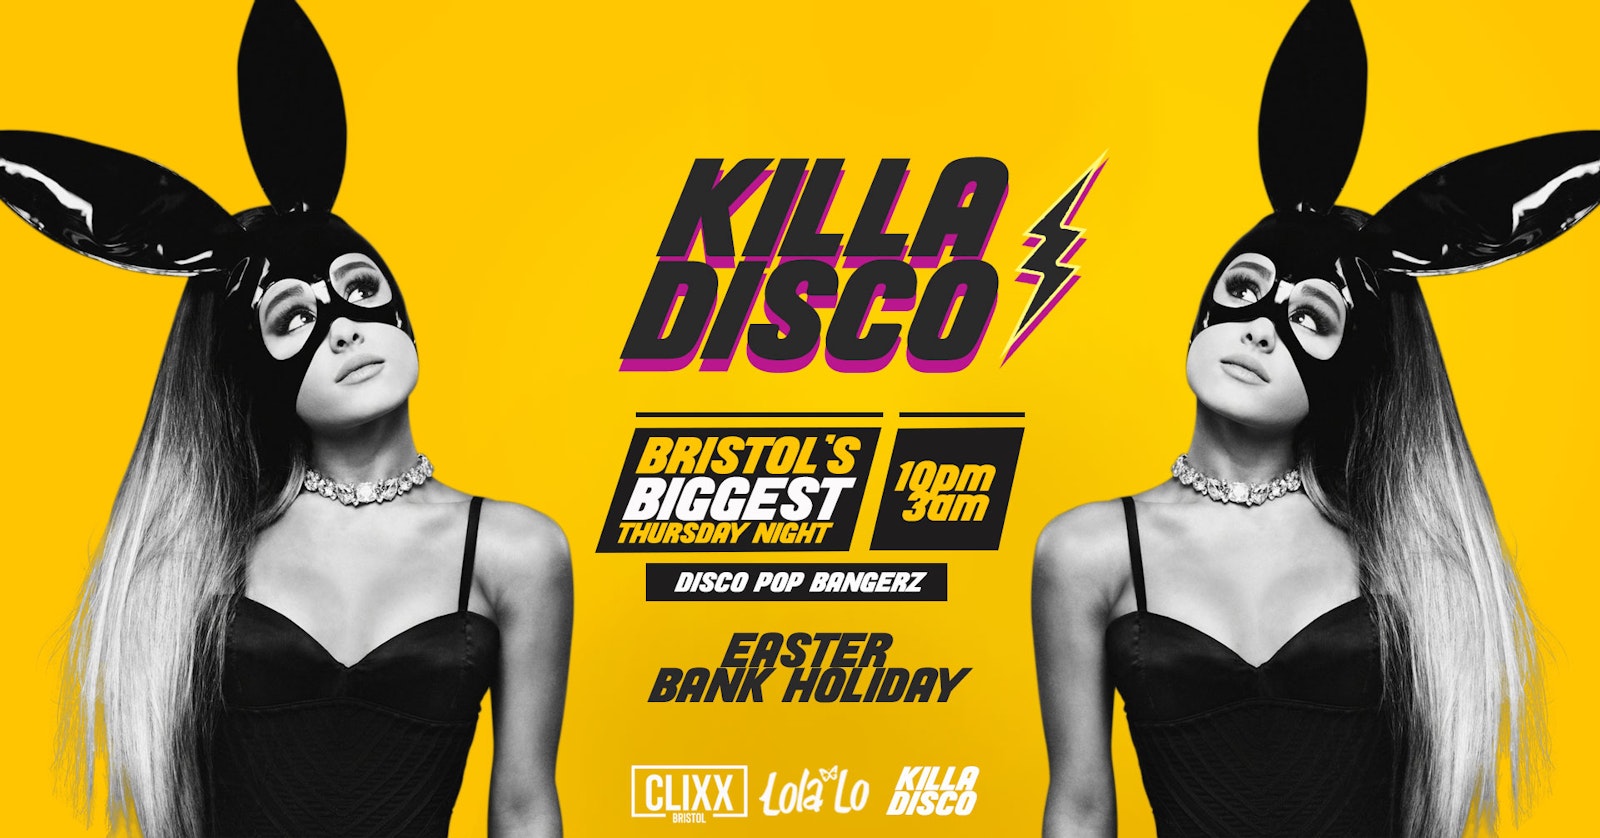 KILLA DISCO ⚡ Easter Bank Holiday Boogie –  Free shot with every ticket 😋